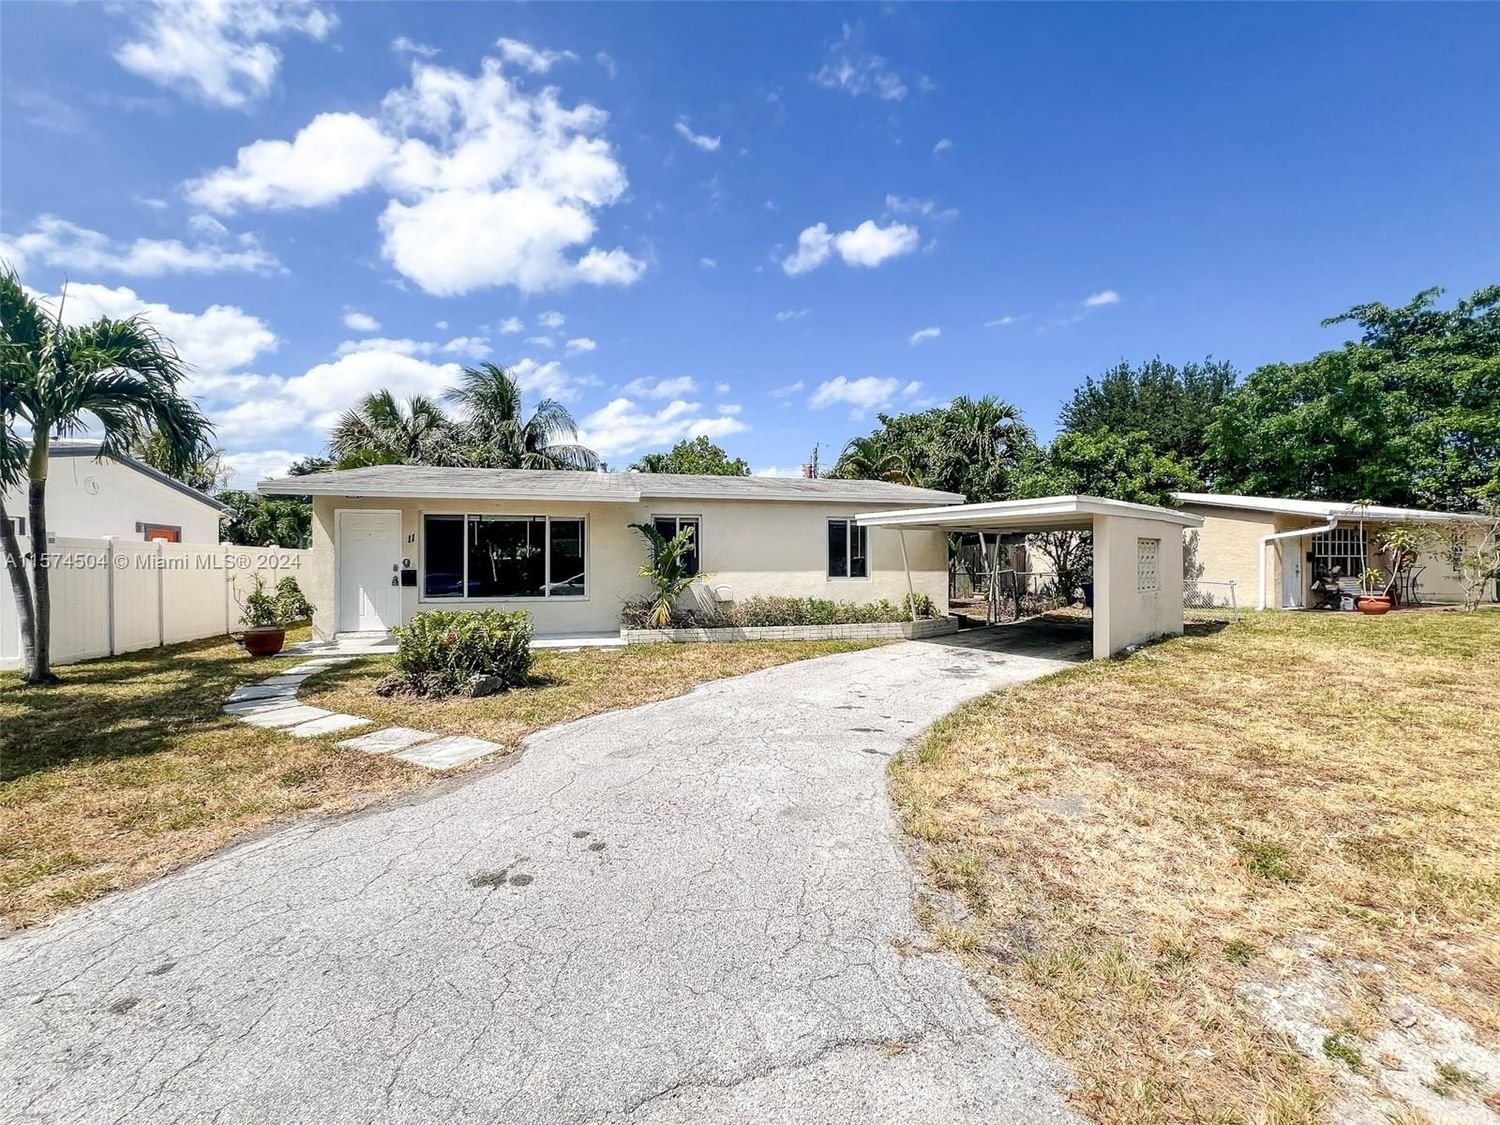 Real estate property located at 11 26th St, Broward County, SUN SET MANORS FIRST ADD, Wilton Manors, FL